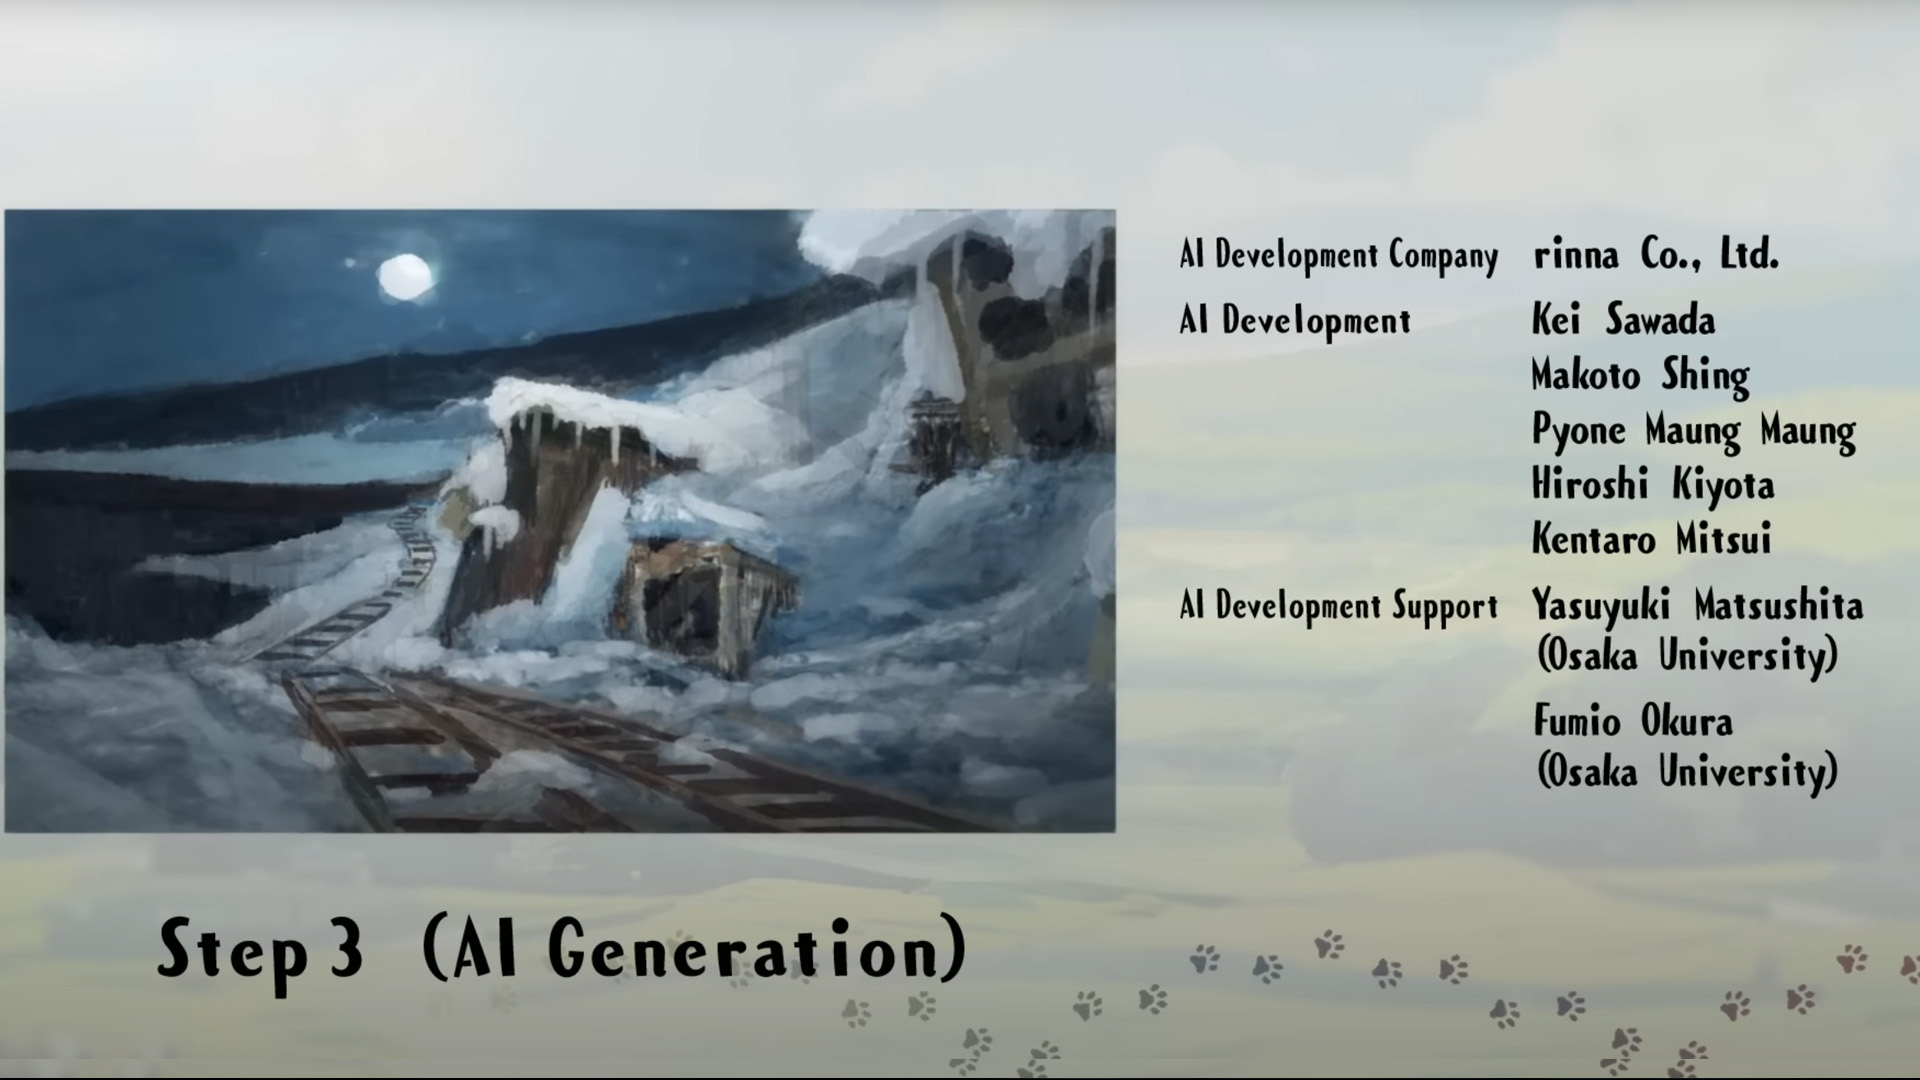 In the illustration from credits we see "Step 3 - AI Generation"